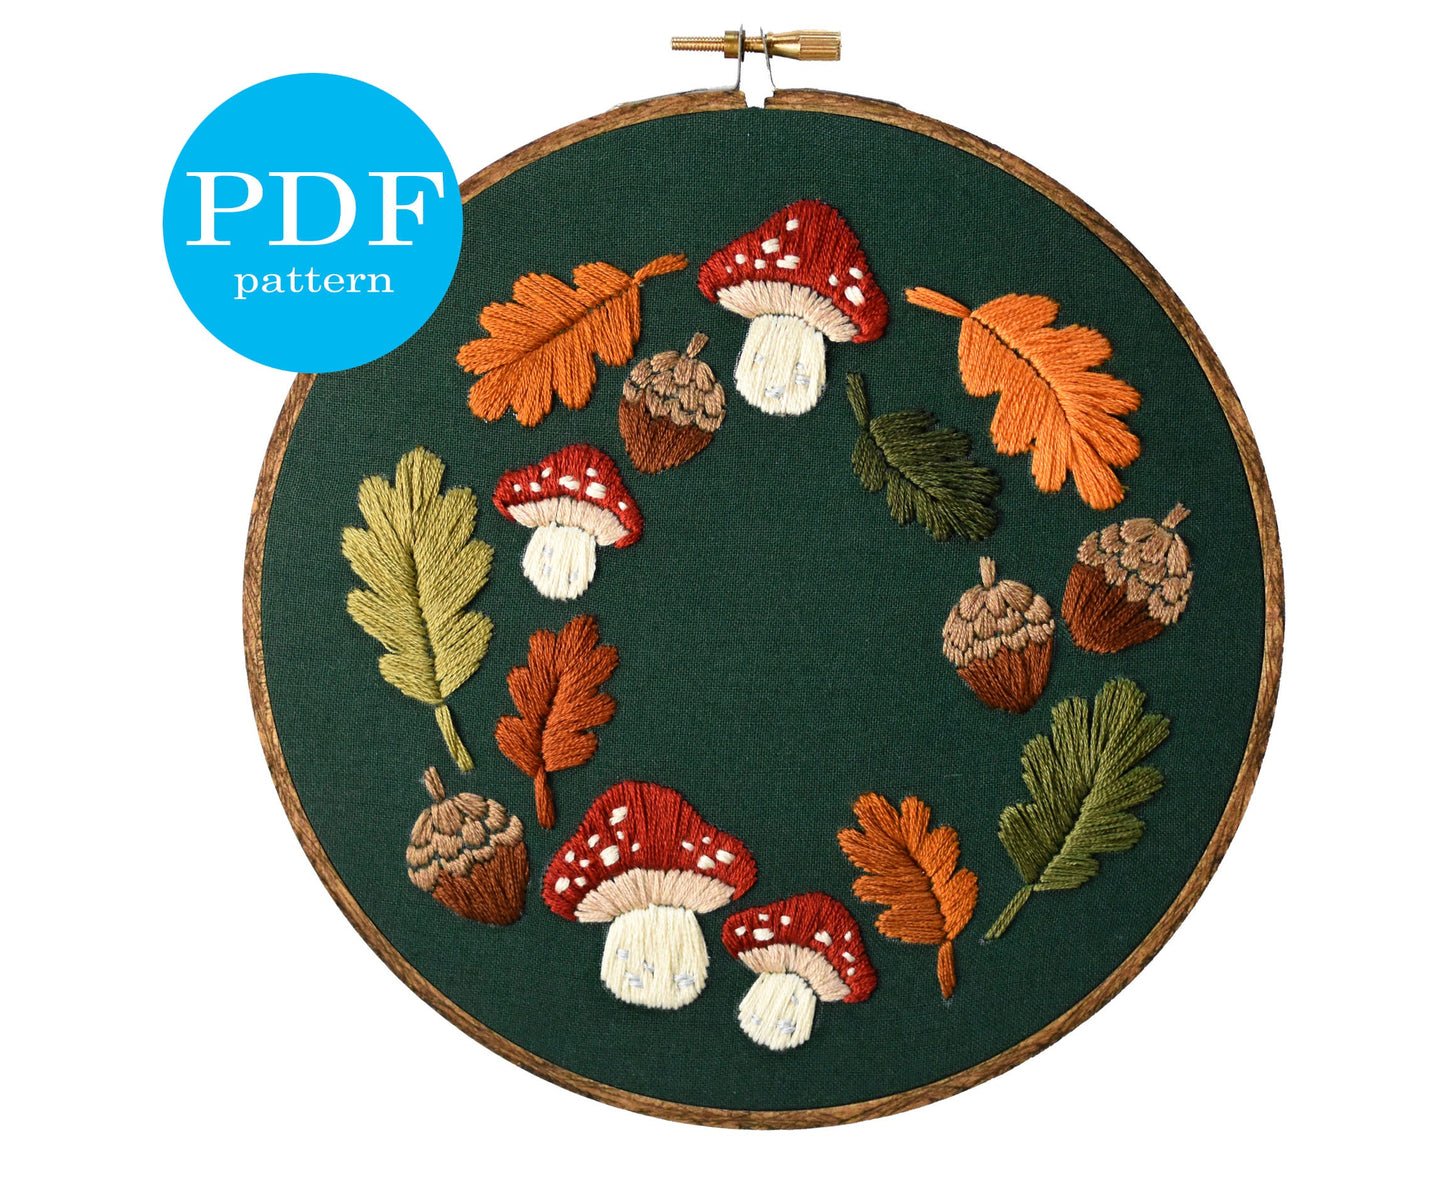 Woodland Embroidery Pattern duo. Beginner Embroidery. PDF embroidery pattern. Autumn Embroidery pattern. Embroidery pattern. Woodland wreath